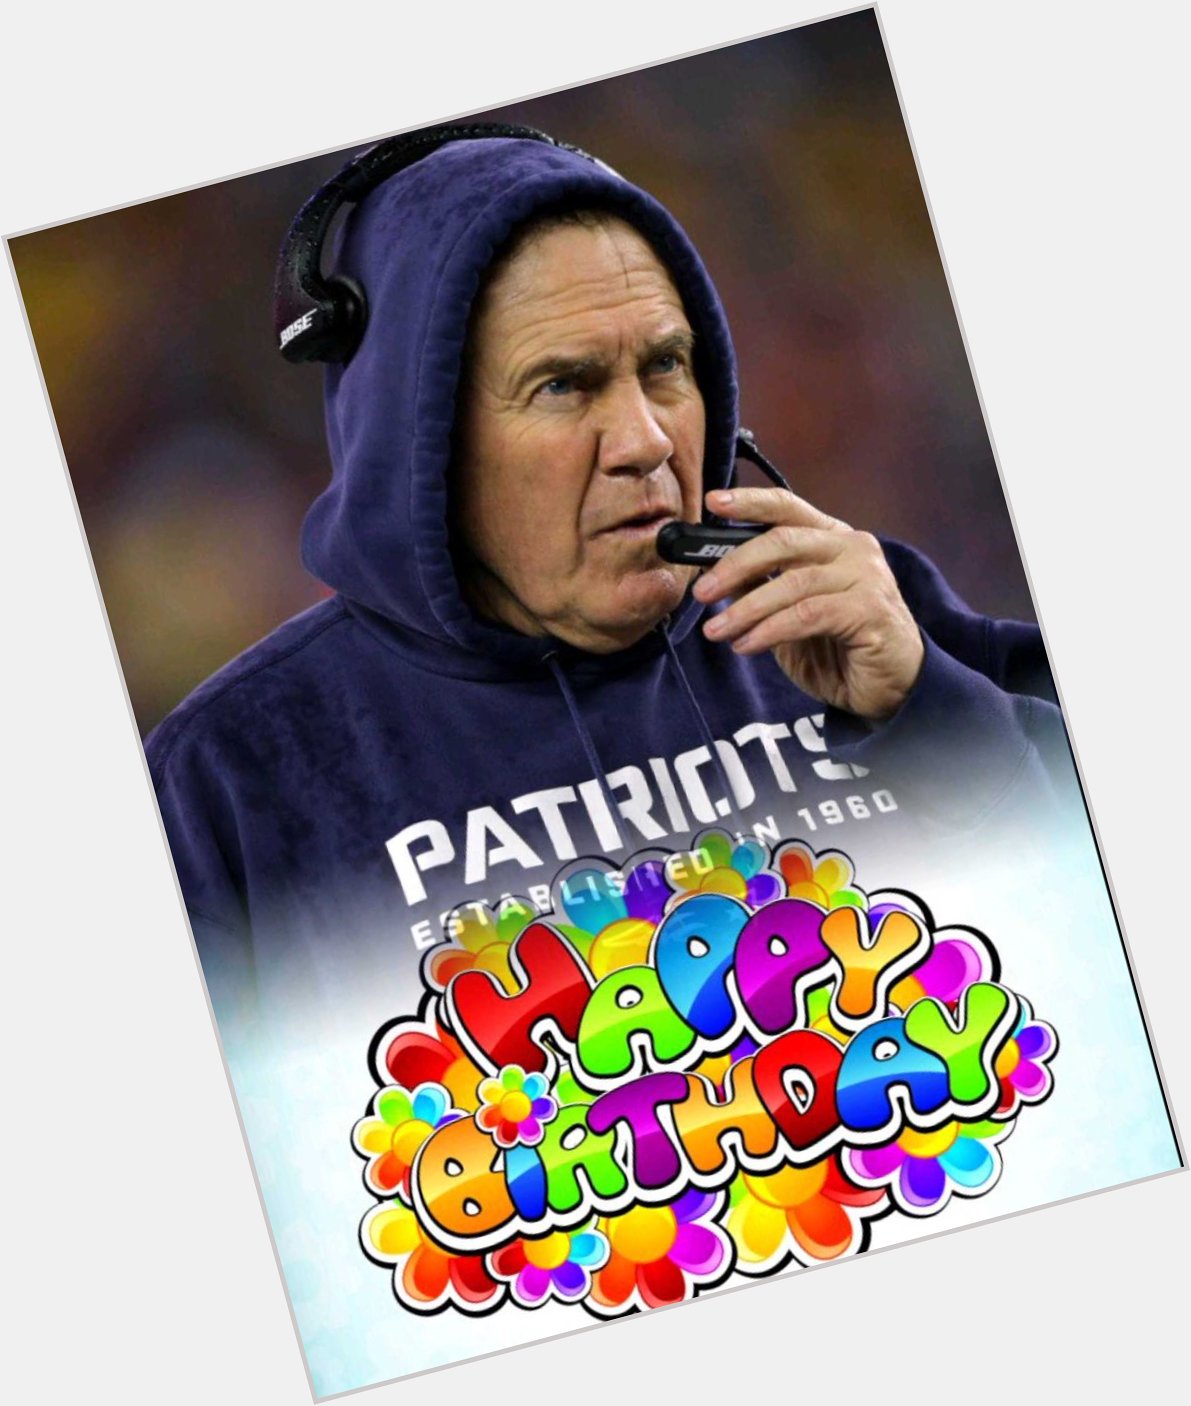 Happy Birthday to Bill Belichick! Since head coaching teams he has won 4 Super Bowls and has a 22-9 postseason record 